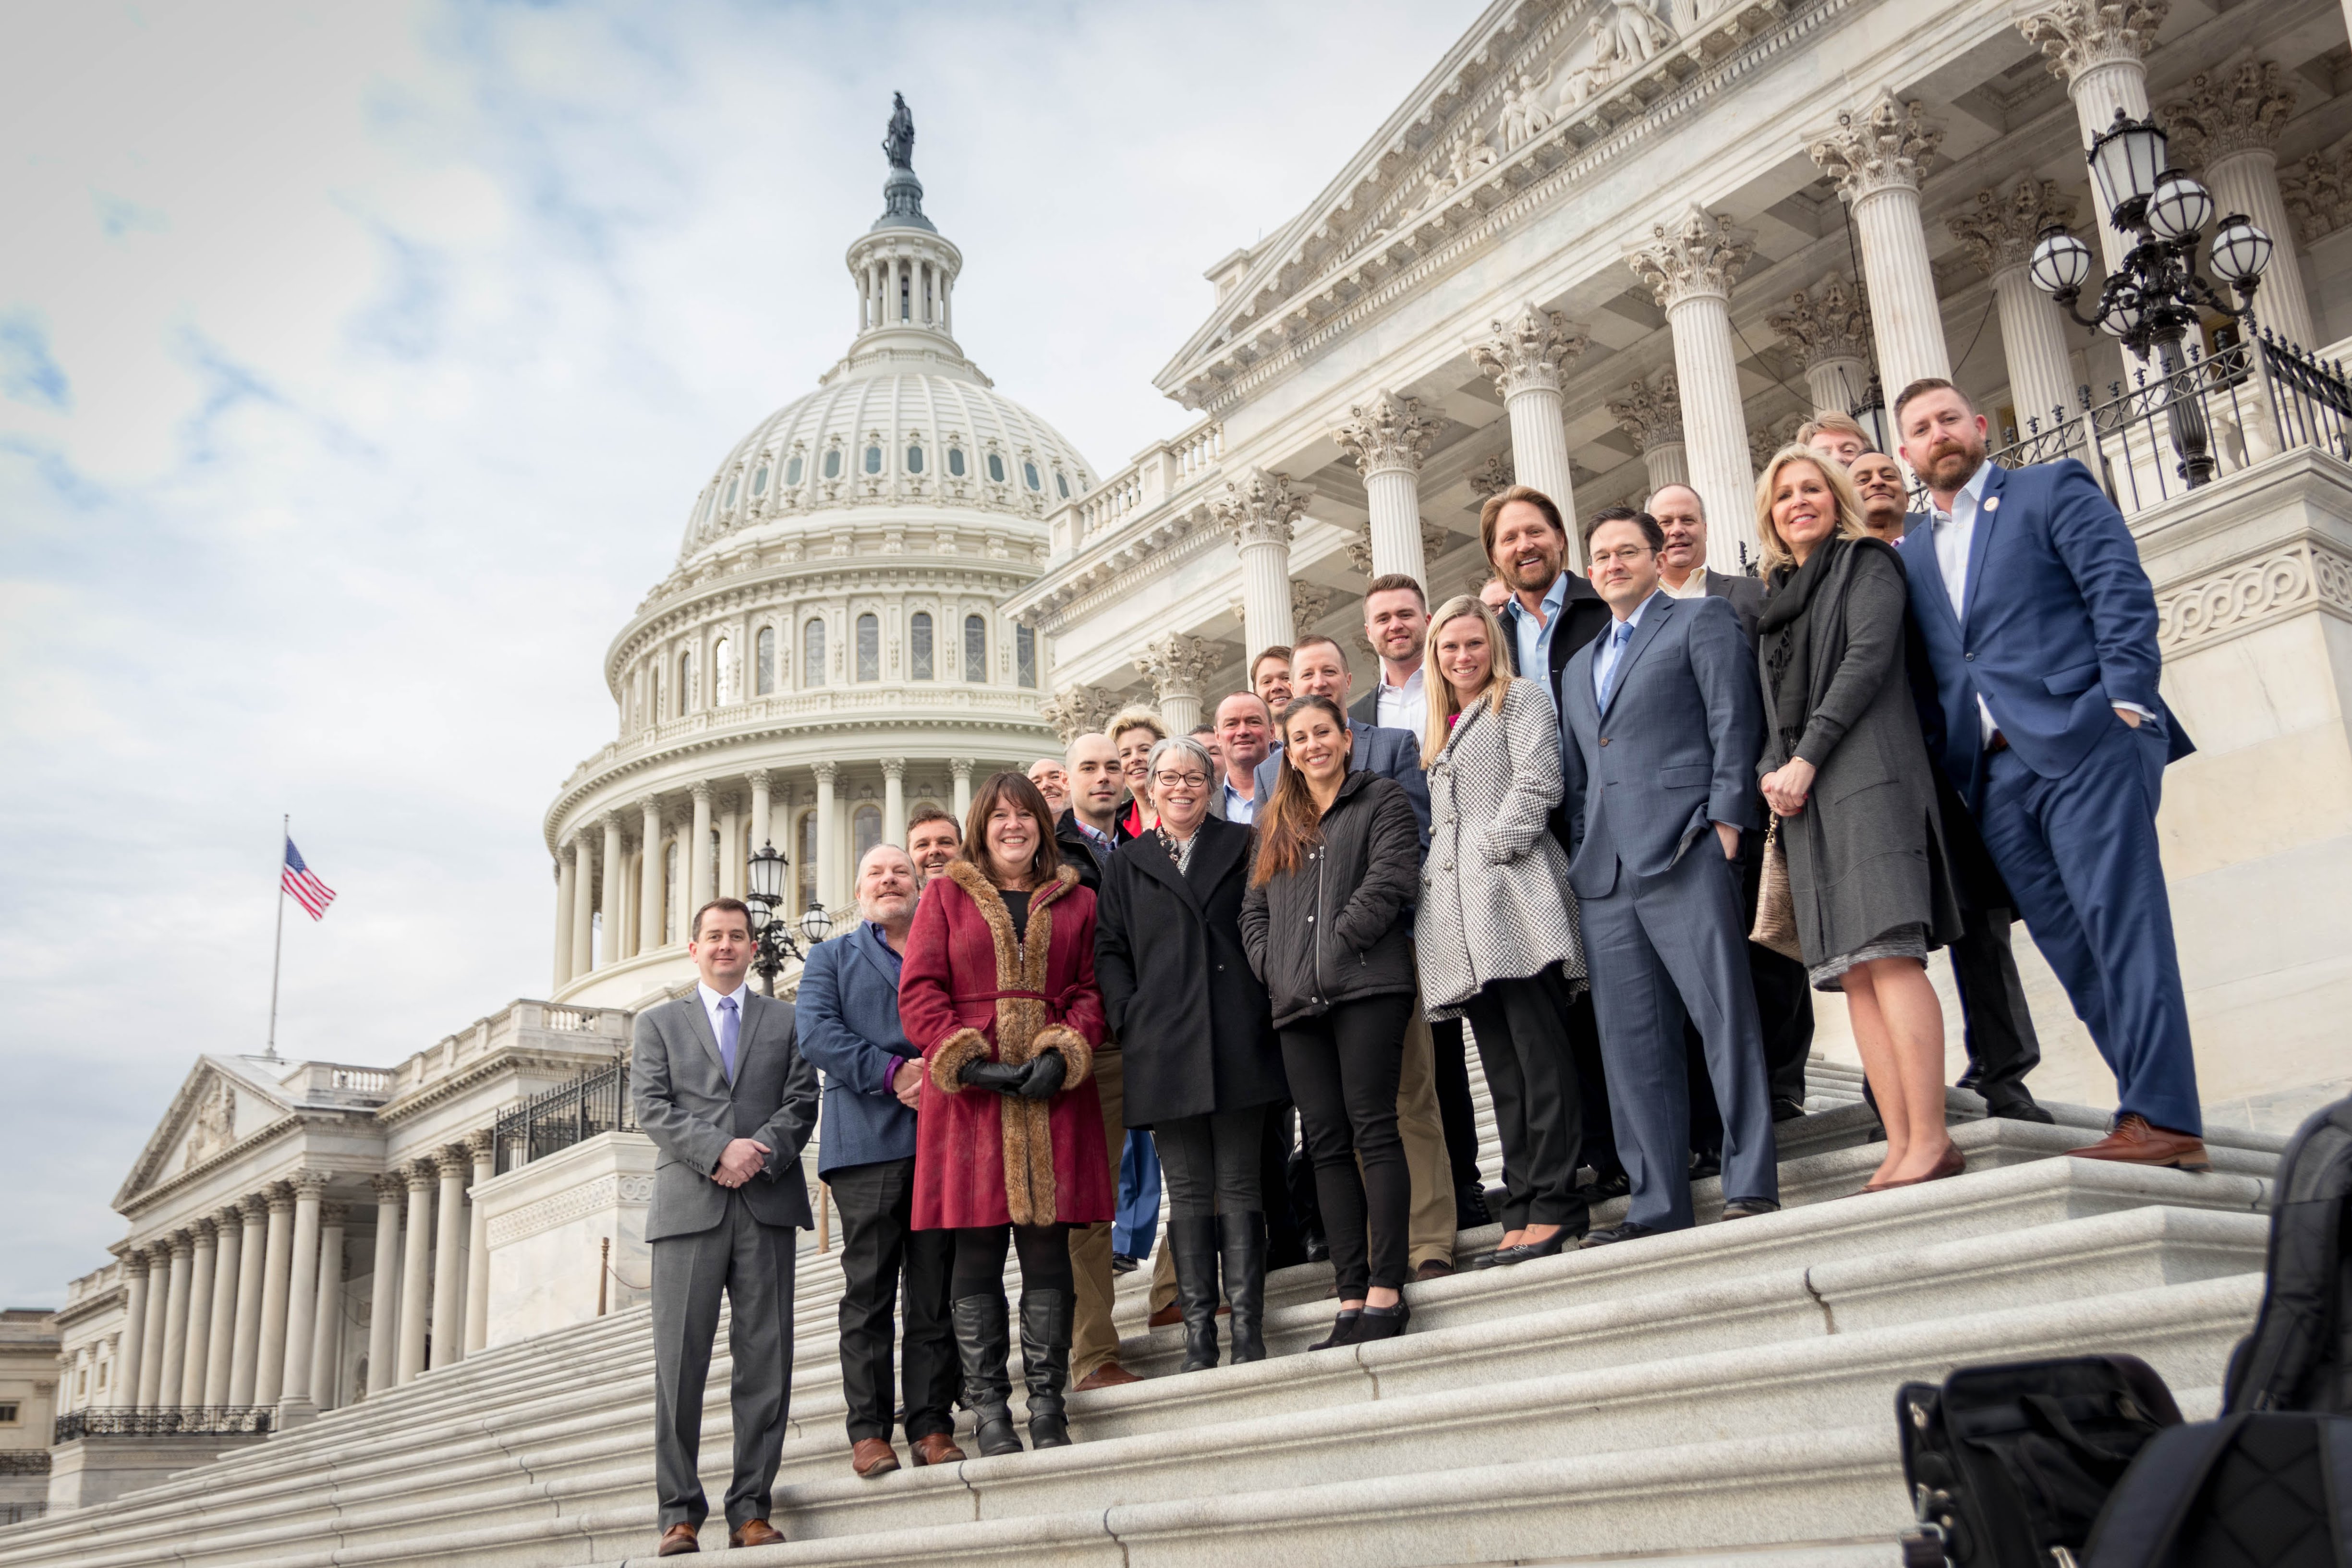 MAR - IndNews - RT3 RT3 members spend the day on Capitol Hill